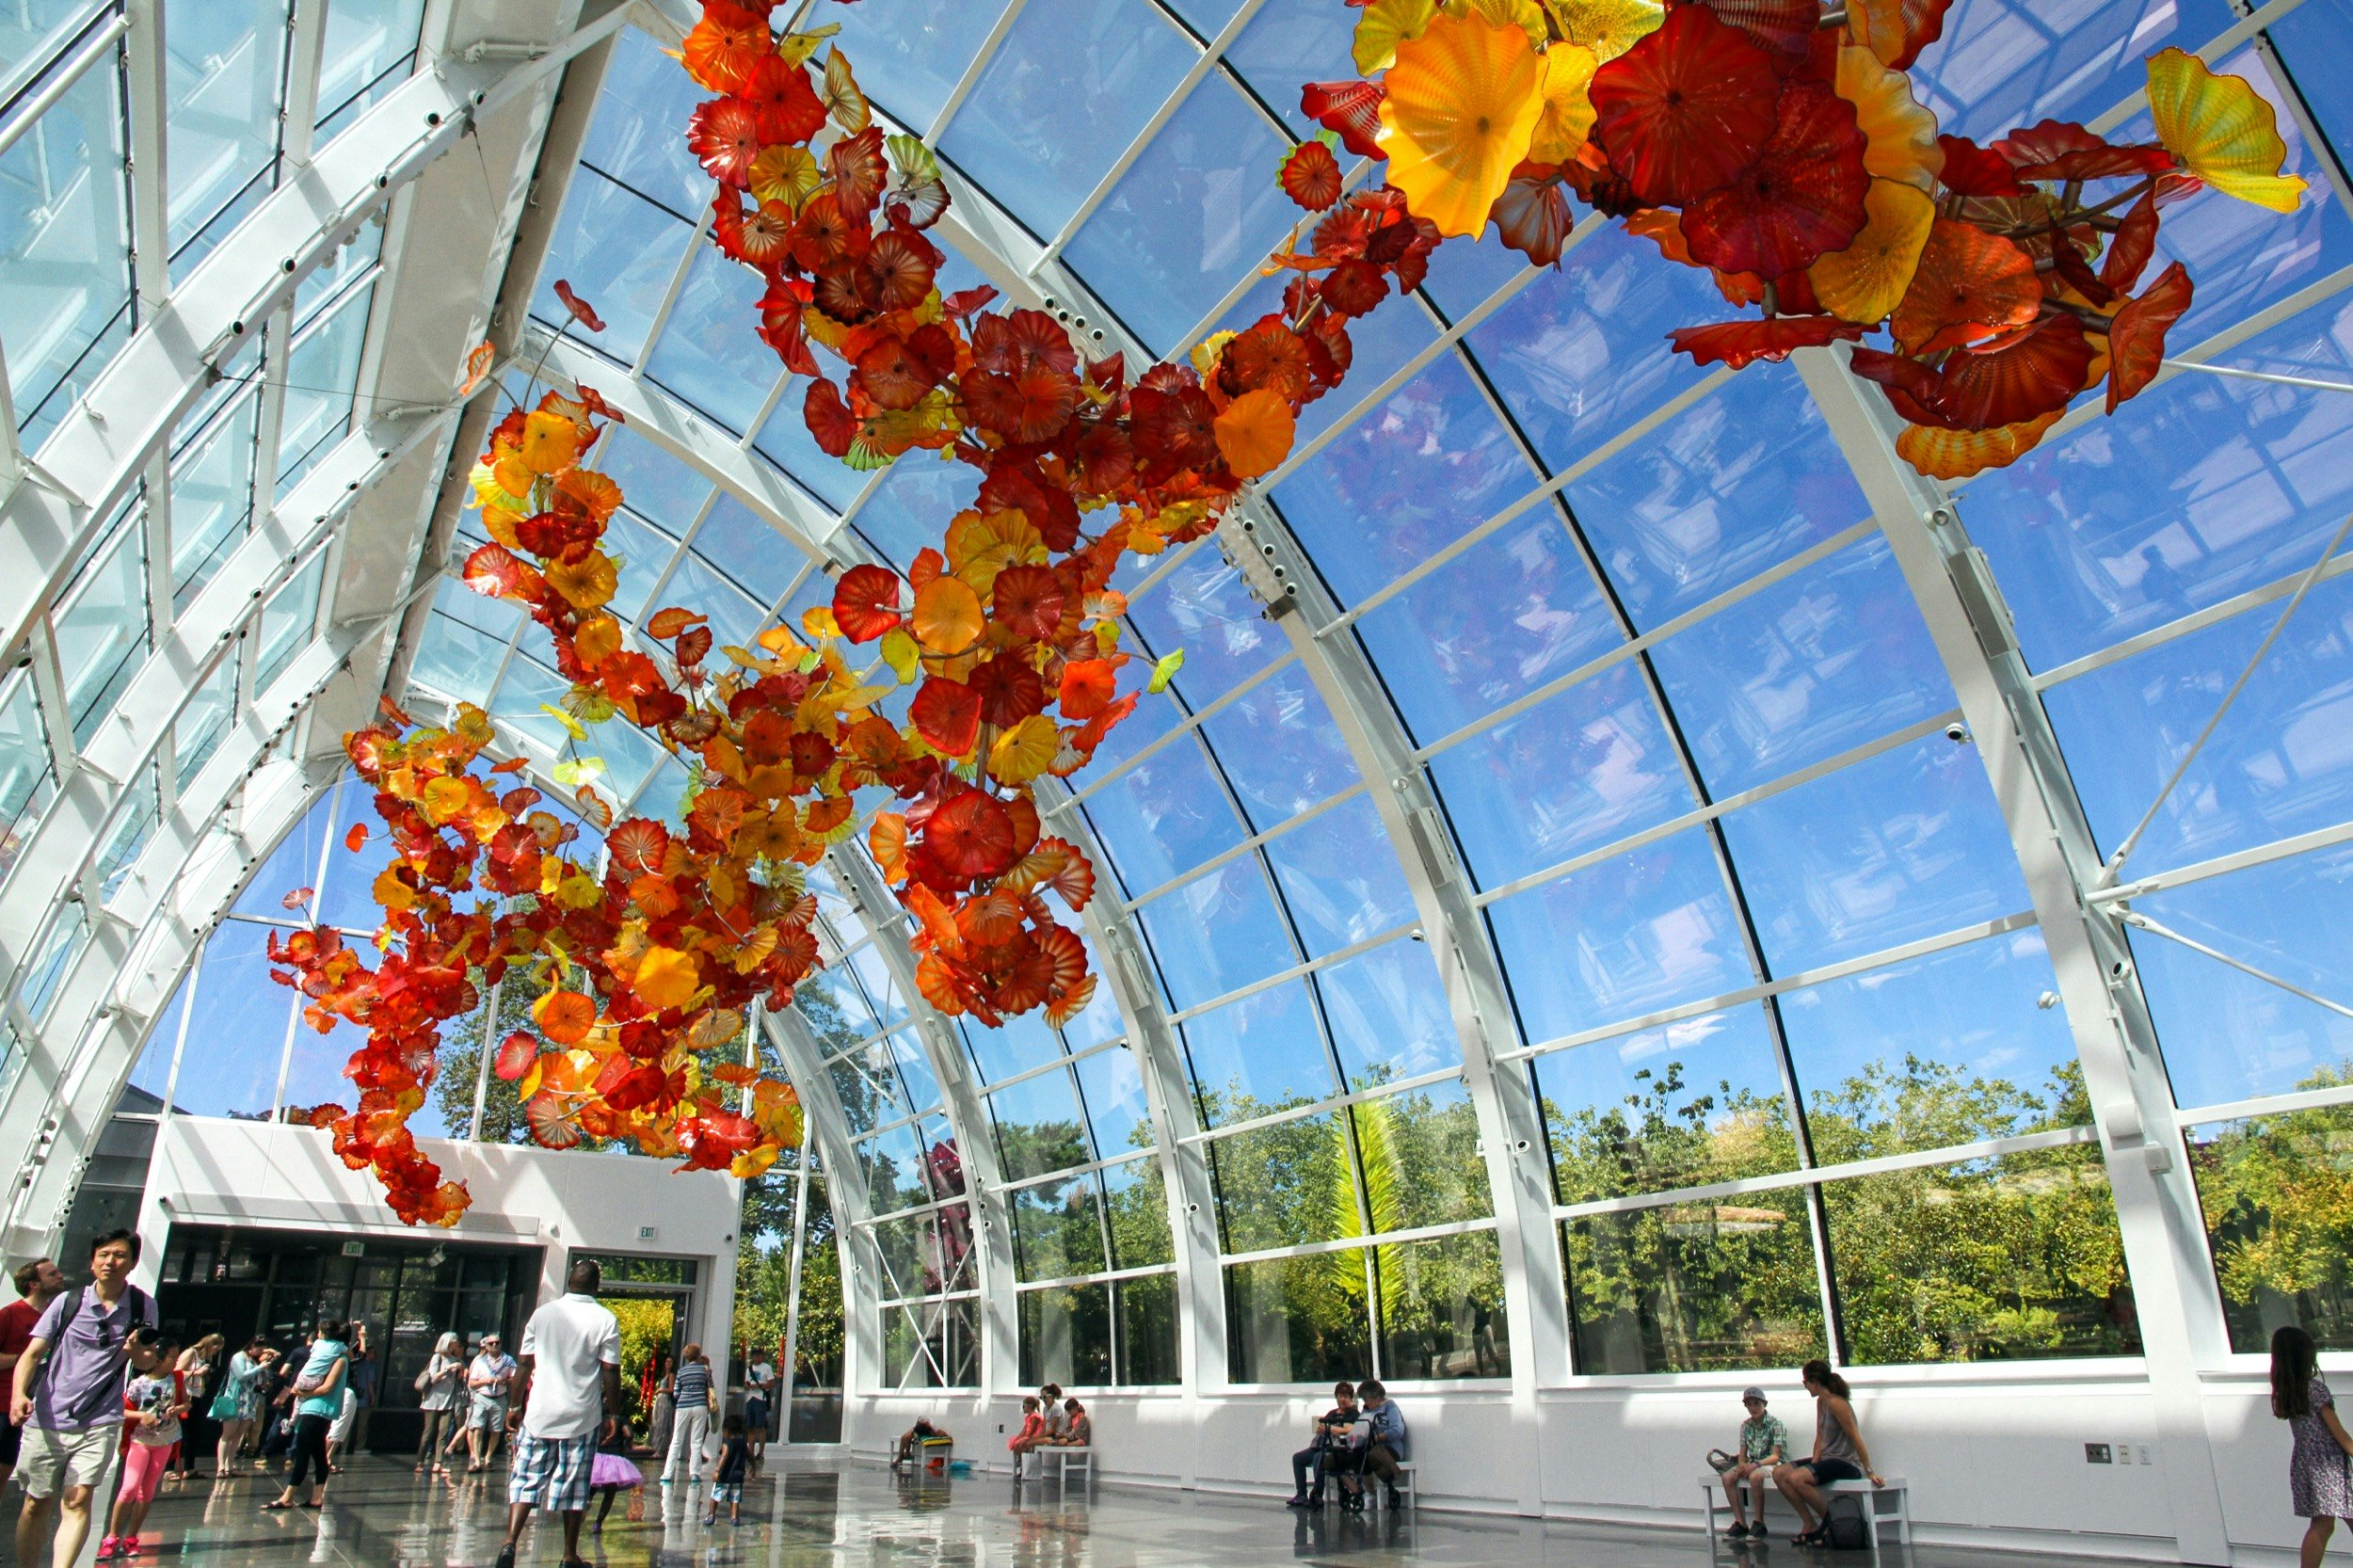 Red and orange flowers are suspended from the ceiling of a clear glass atrium as people walk below on a sunny day; Where to see Chihuly in America